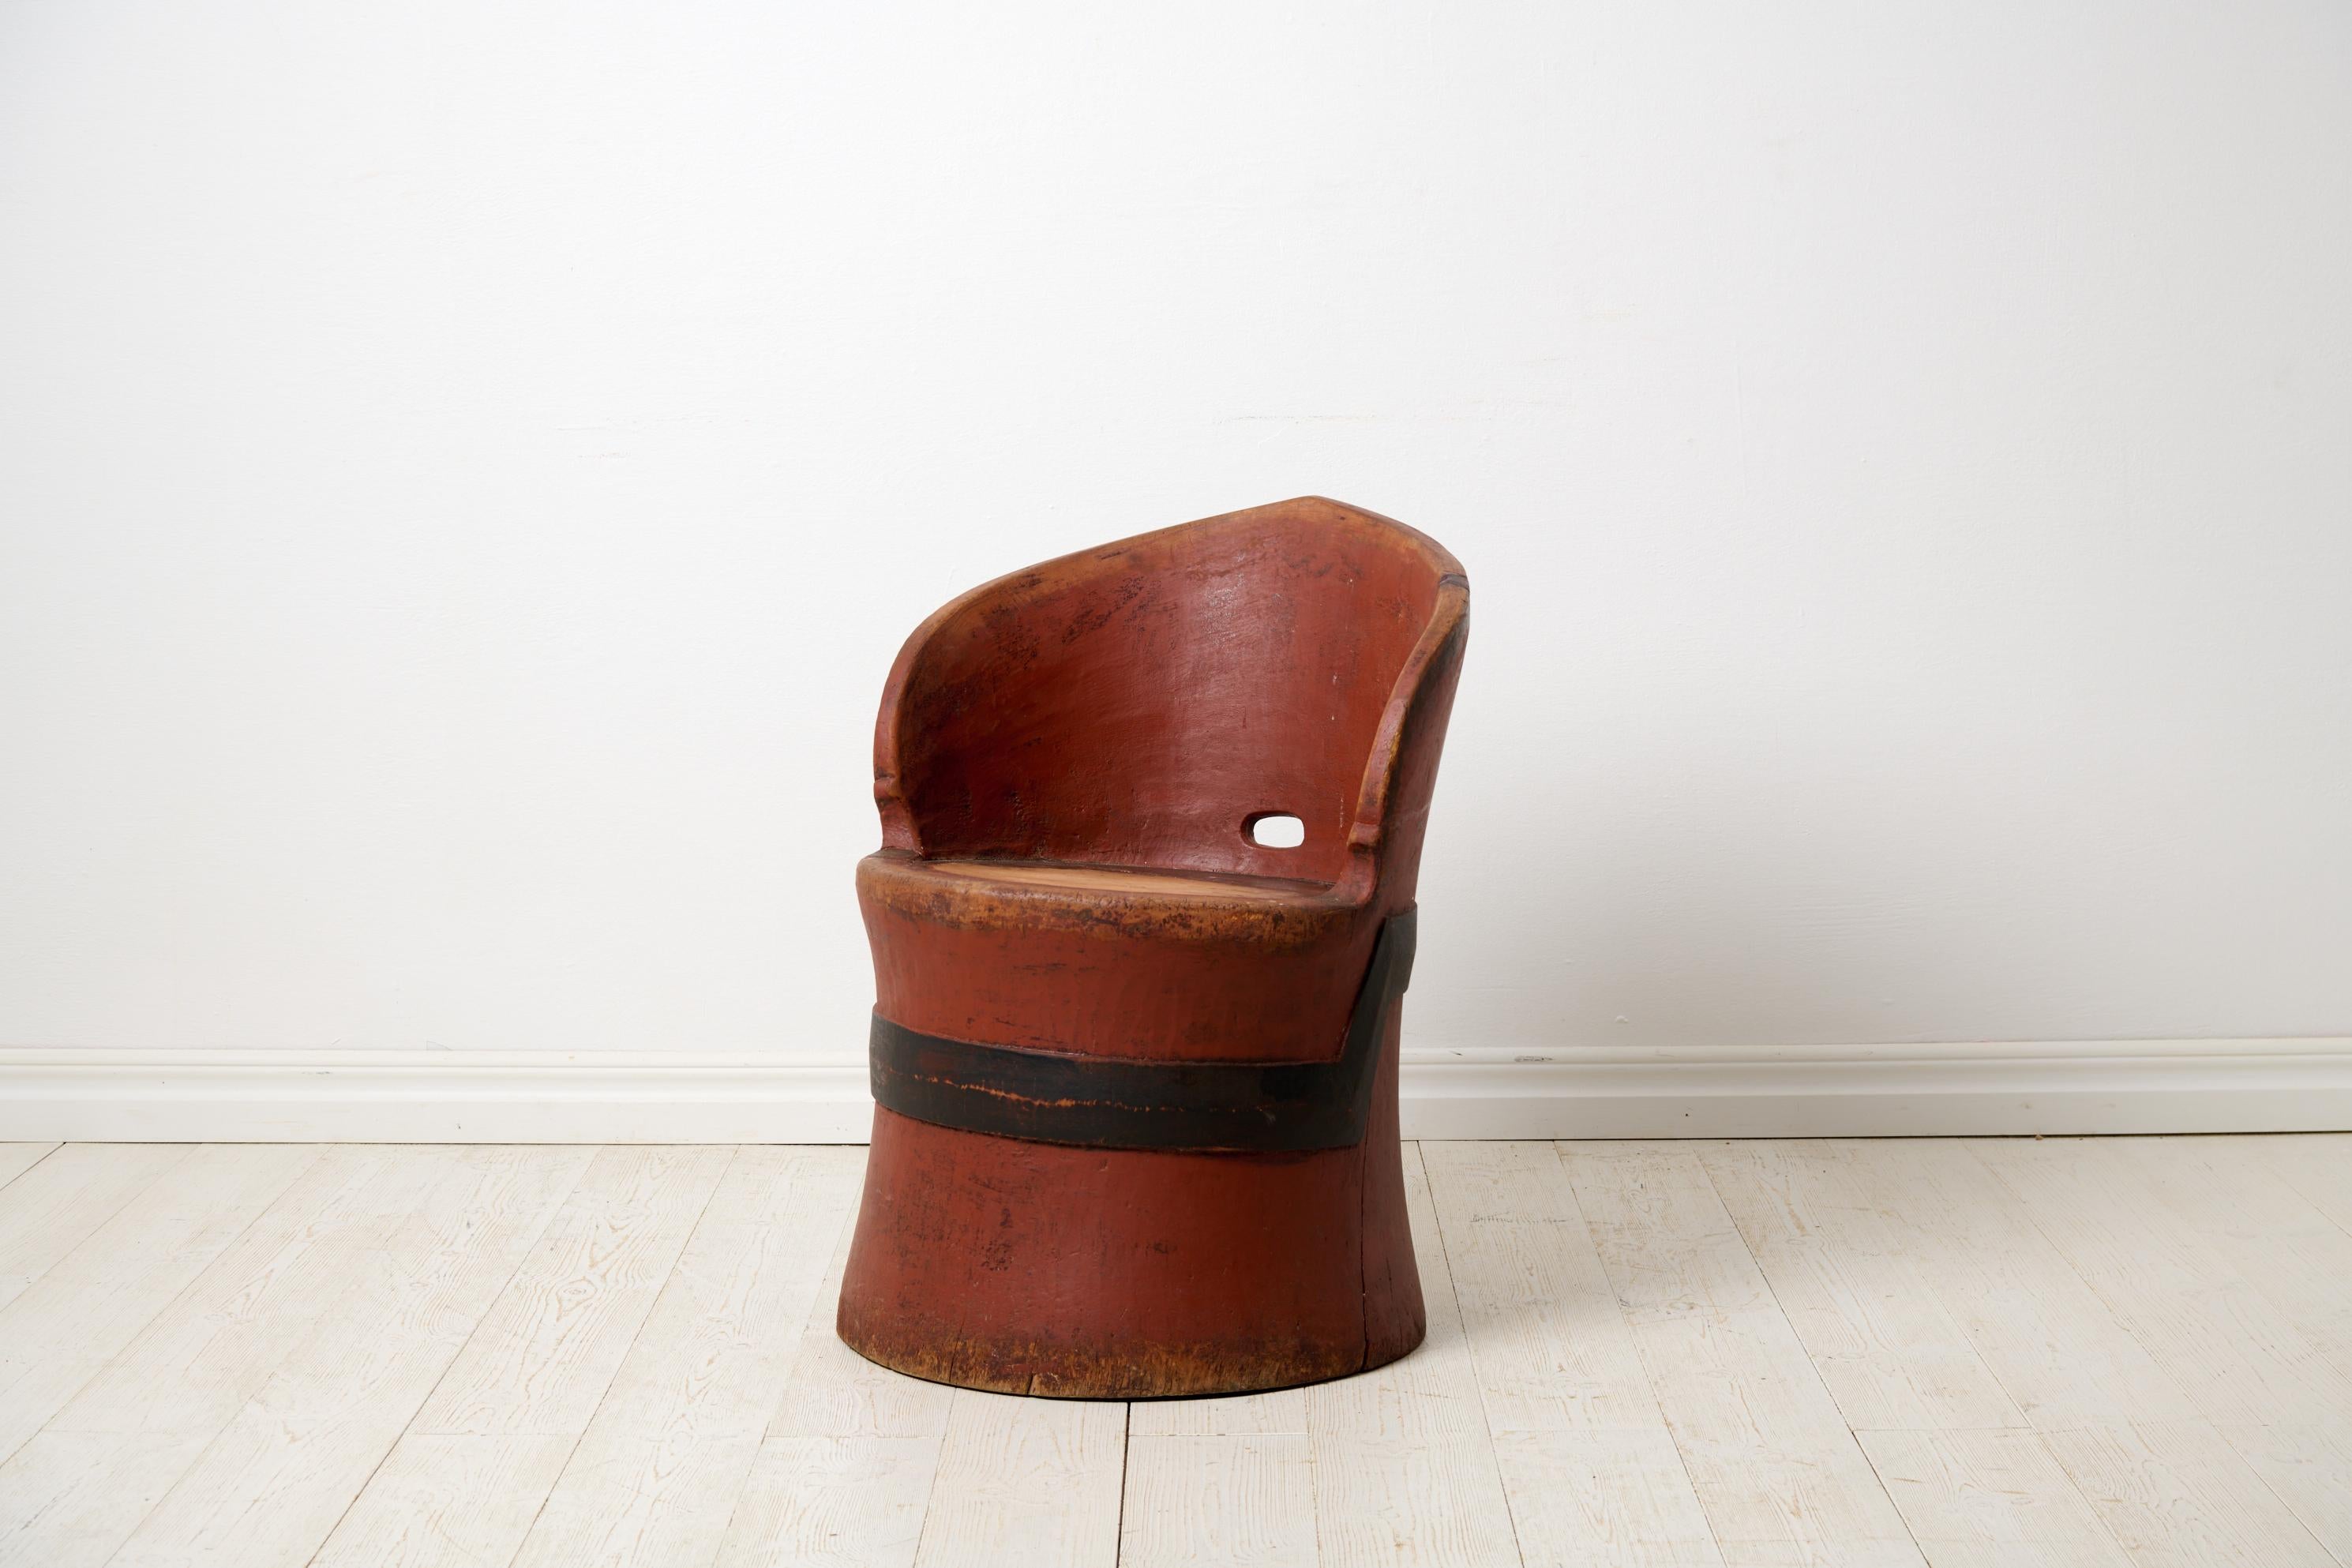 Antique Swedish stump chair with original red paint. The chair is a primitive furniture made by hand from one large, solid log of wood. The log has then been hollowed and shaped into the current form. Made from pine around the mid 1800s in Sweden.